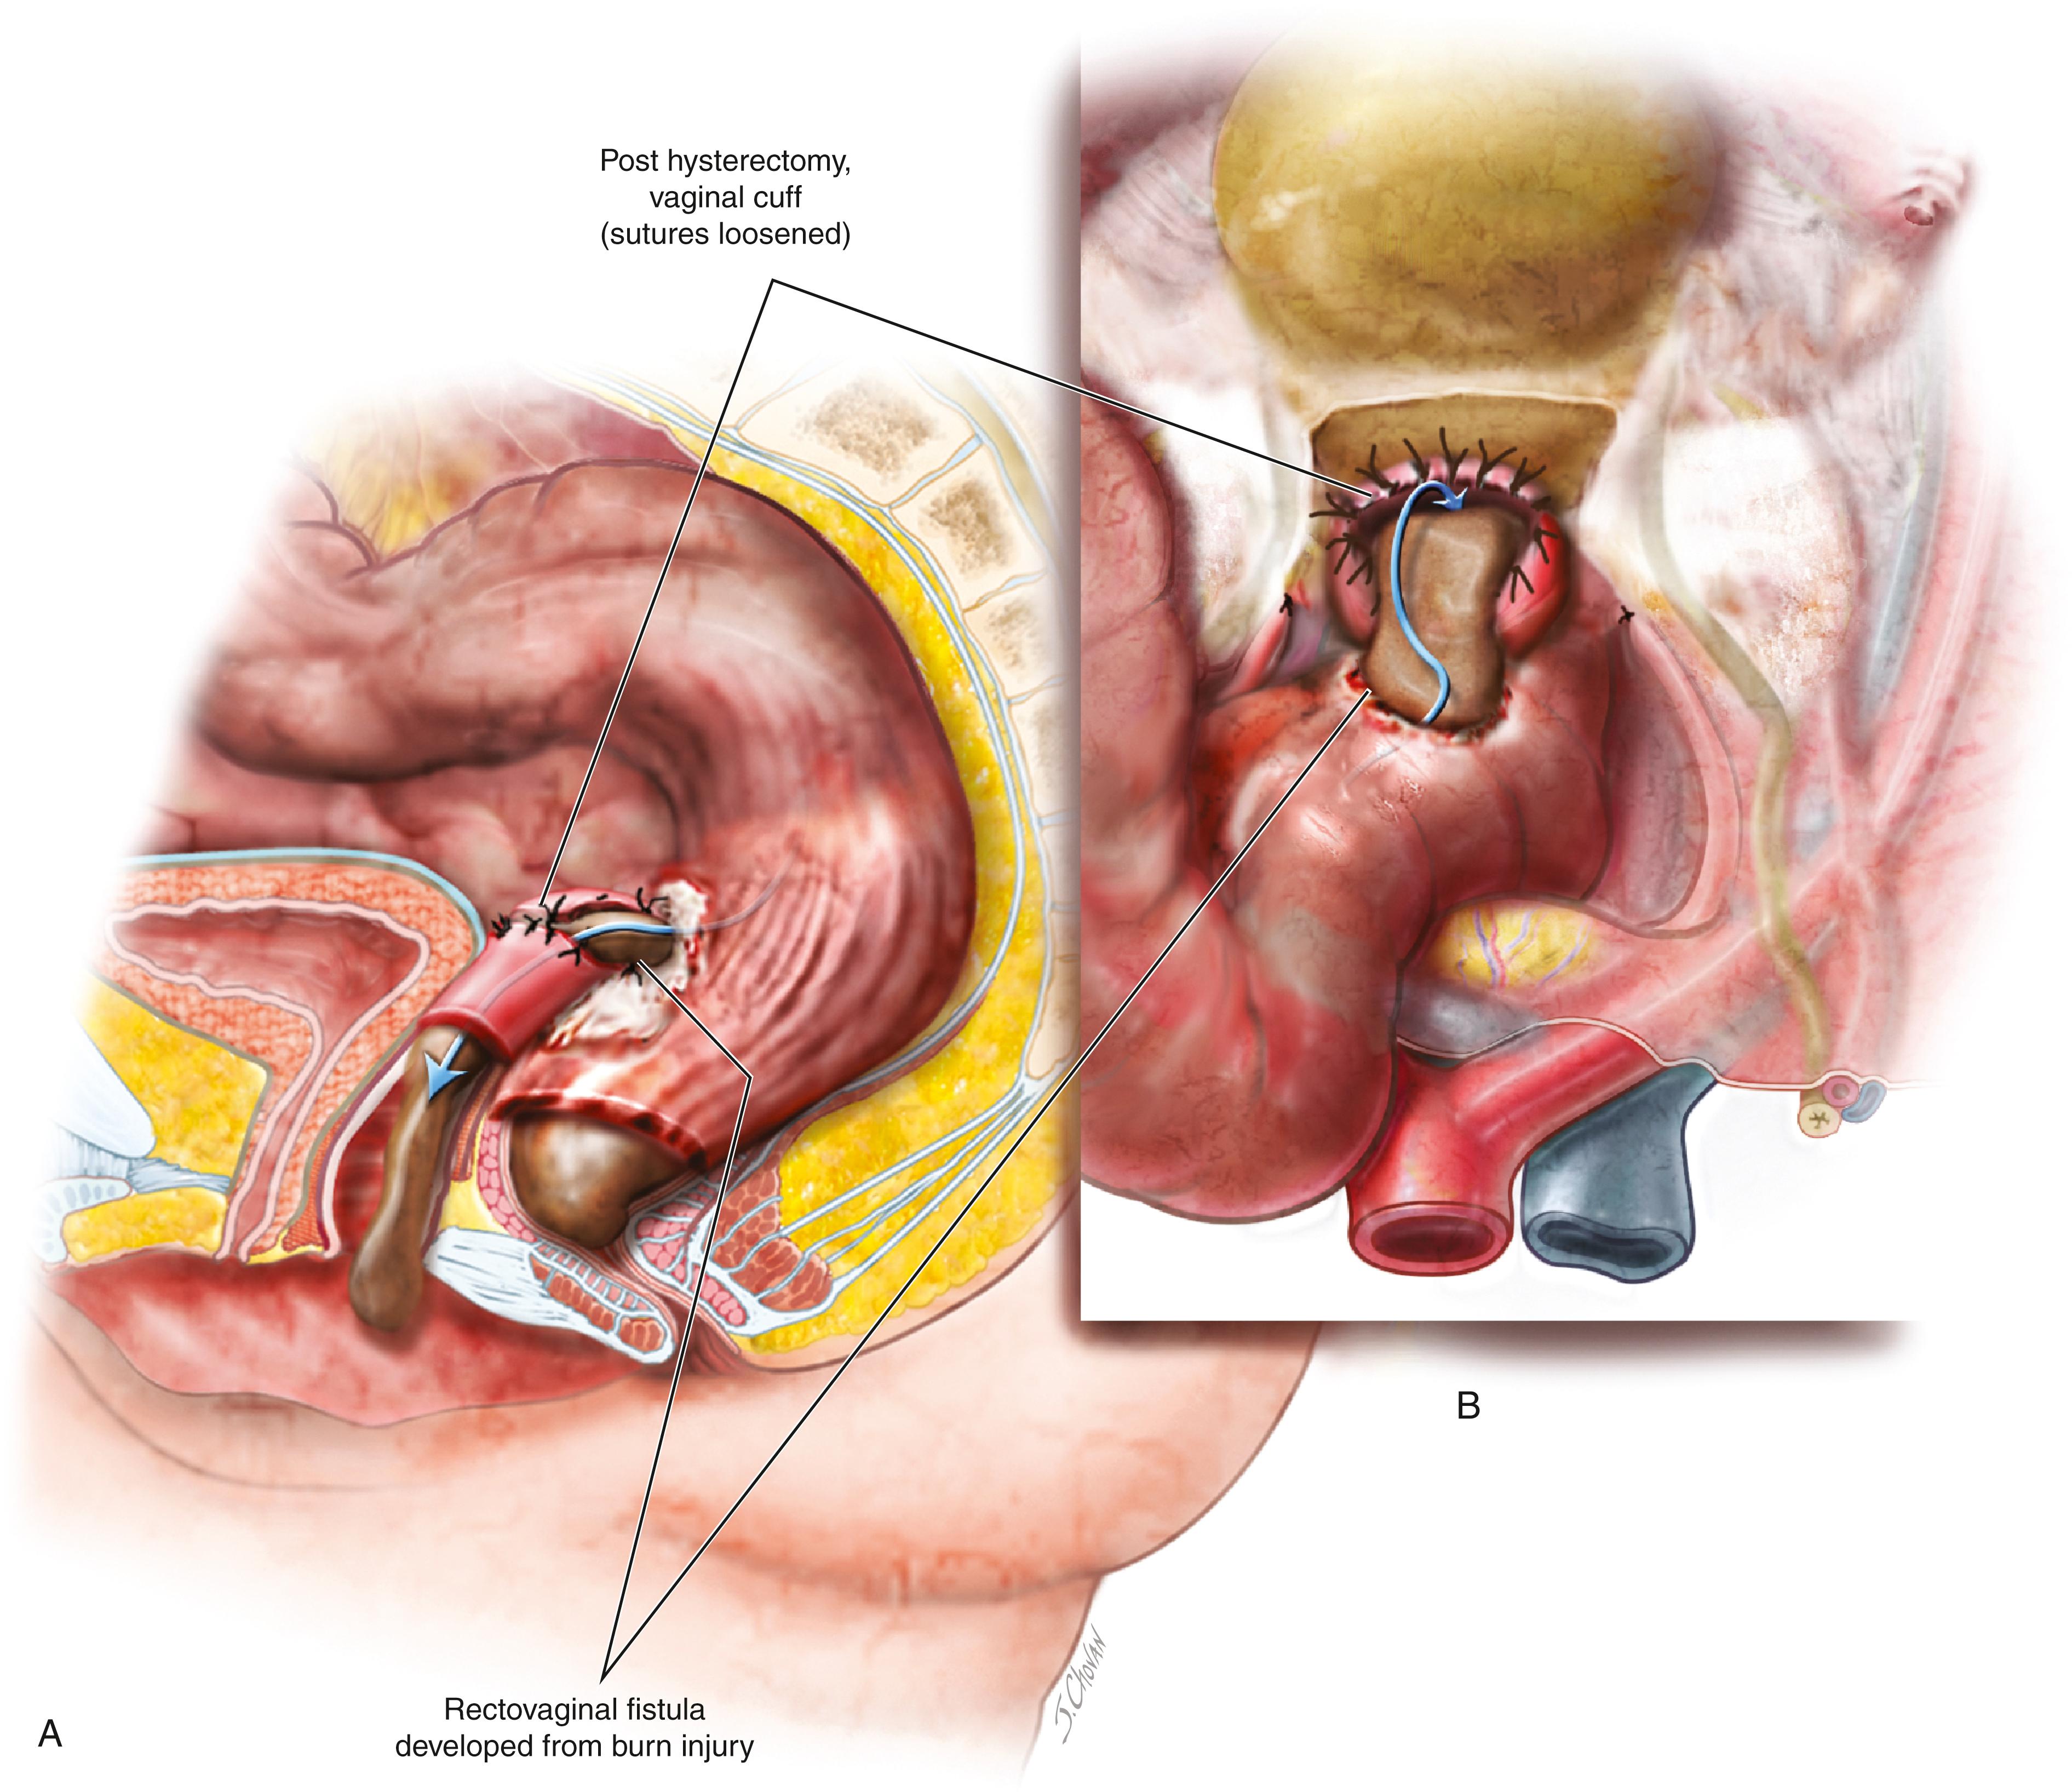 FIG. 119.6, A. The colonic injury subsequently sloughs and drains fecal matter via the cuff (sutures unravel) into the vagina, creating a colonic-vaginal fistula. B. (inset) Magnified view of the colonic-vaginal fecal fistula.